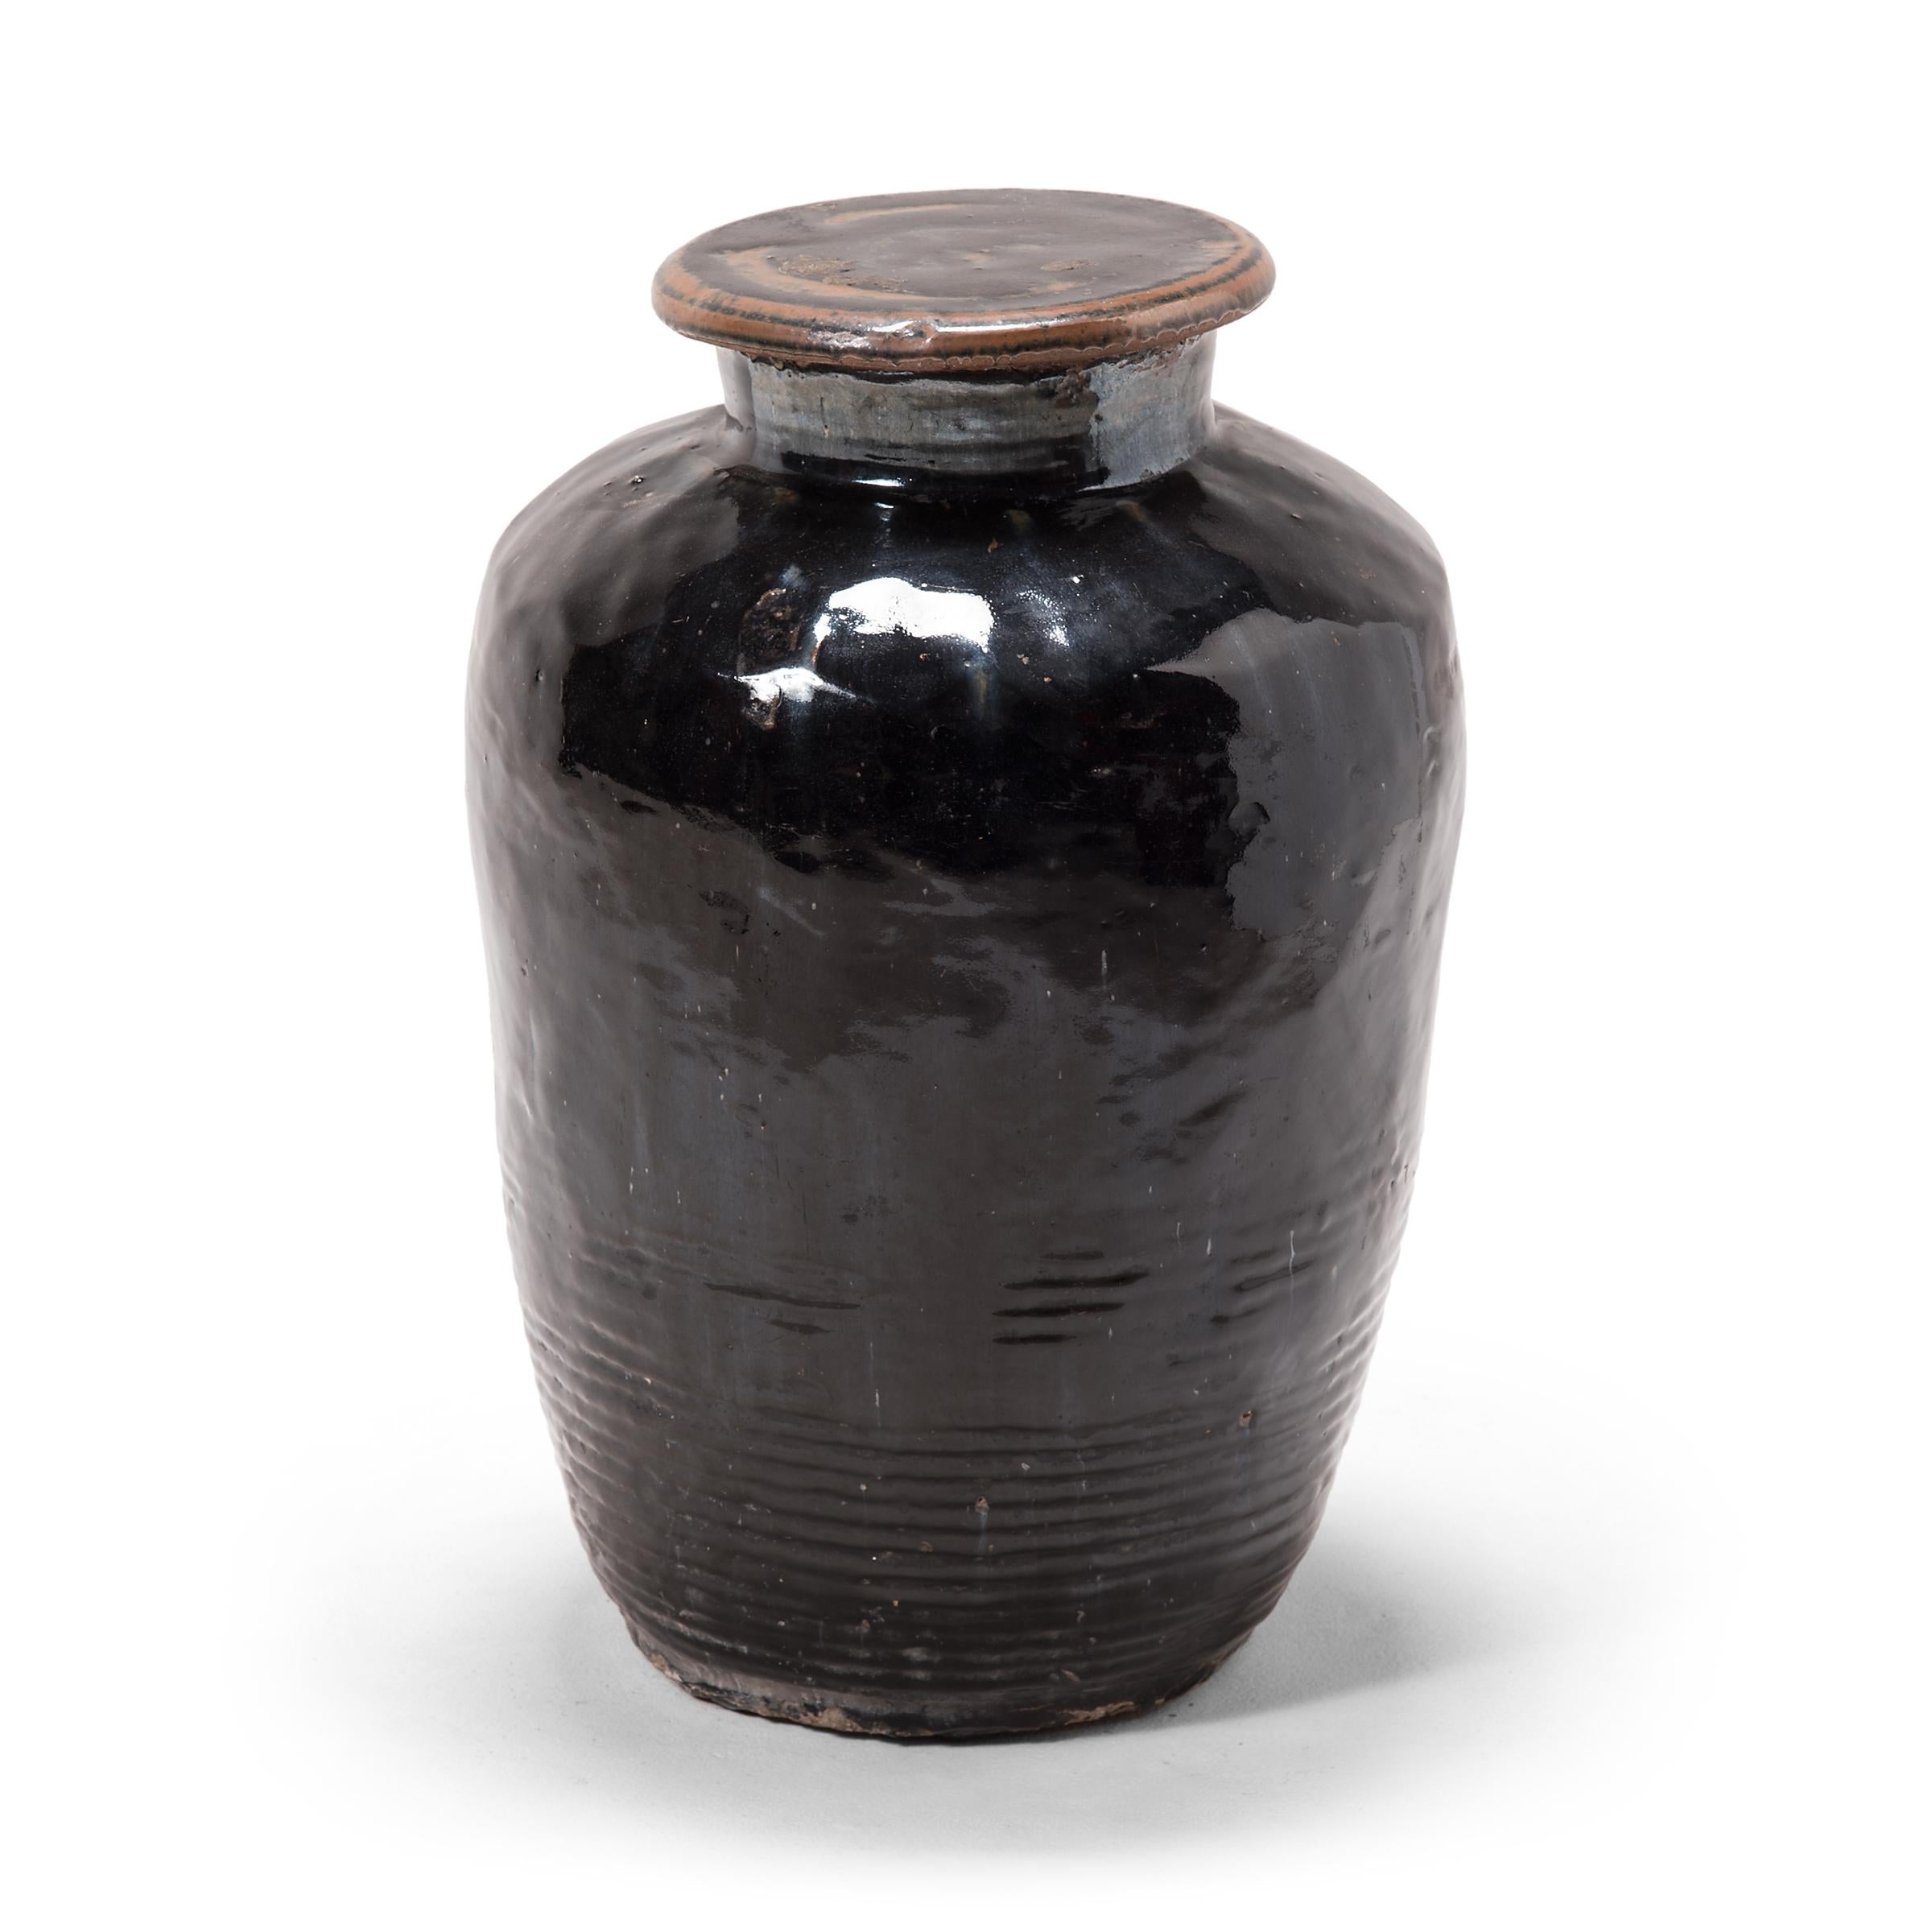 Originally used for fermenting rice or sorghum into vinegar, this monumental early 20th century vessel is coated inside and out with a dark glaze. The inky glaze sheets and pools over the jar's textured sides, lingering beautifully on every